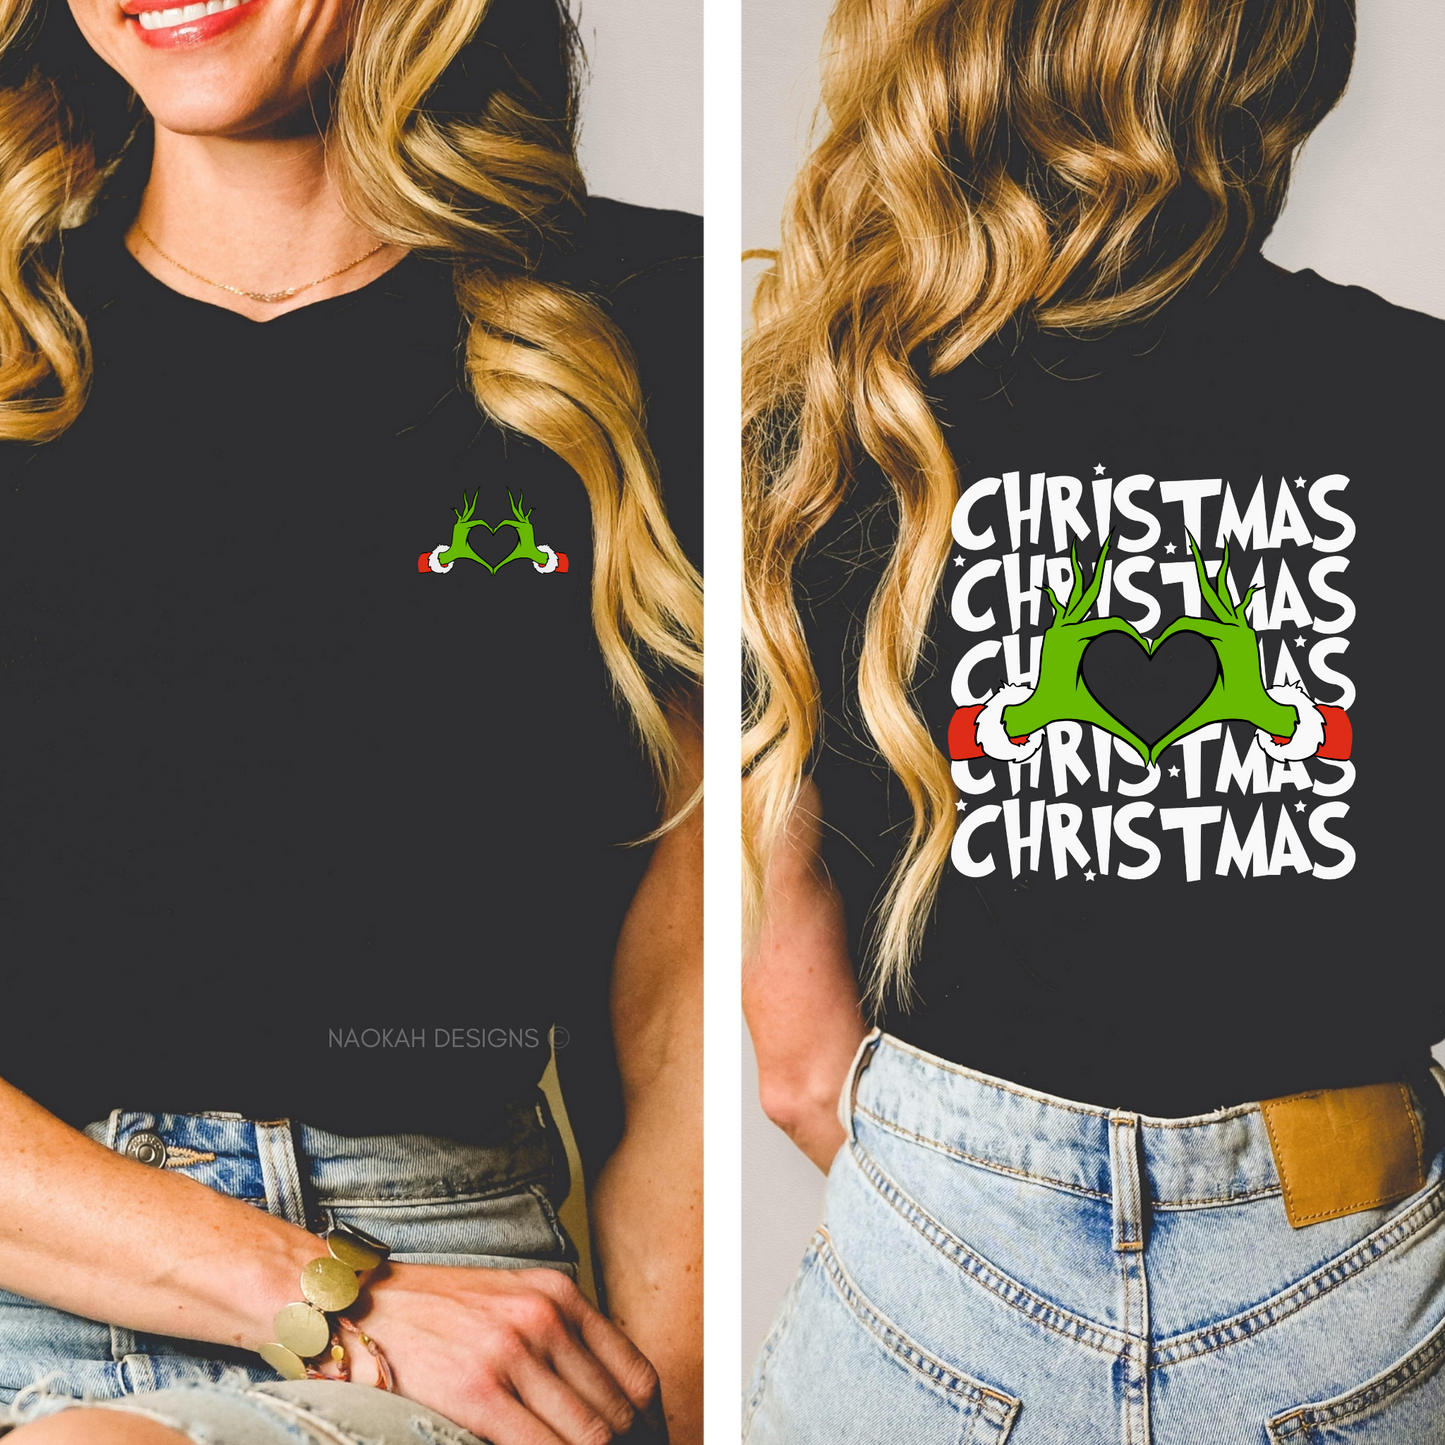 Grinch Christmas Heart Shirt, My Day Grinch Shirt, That's It I'm Not Going Grinch Shirt, There's Some Who's In This House Shirt